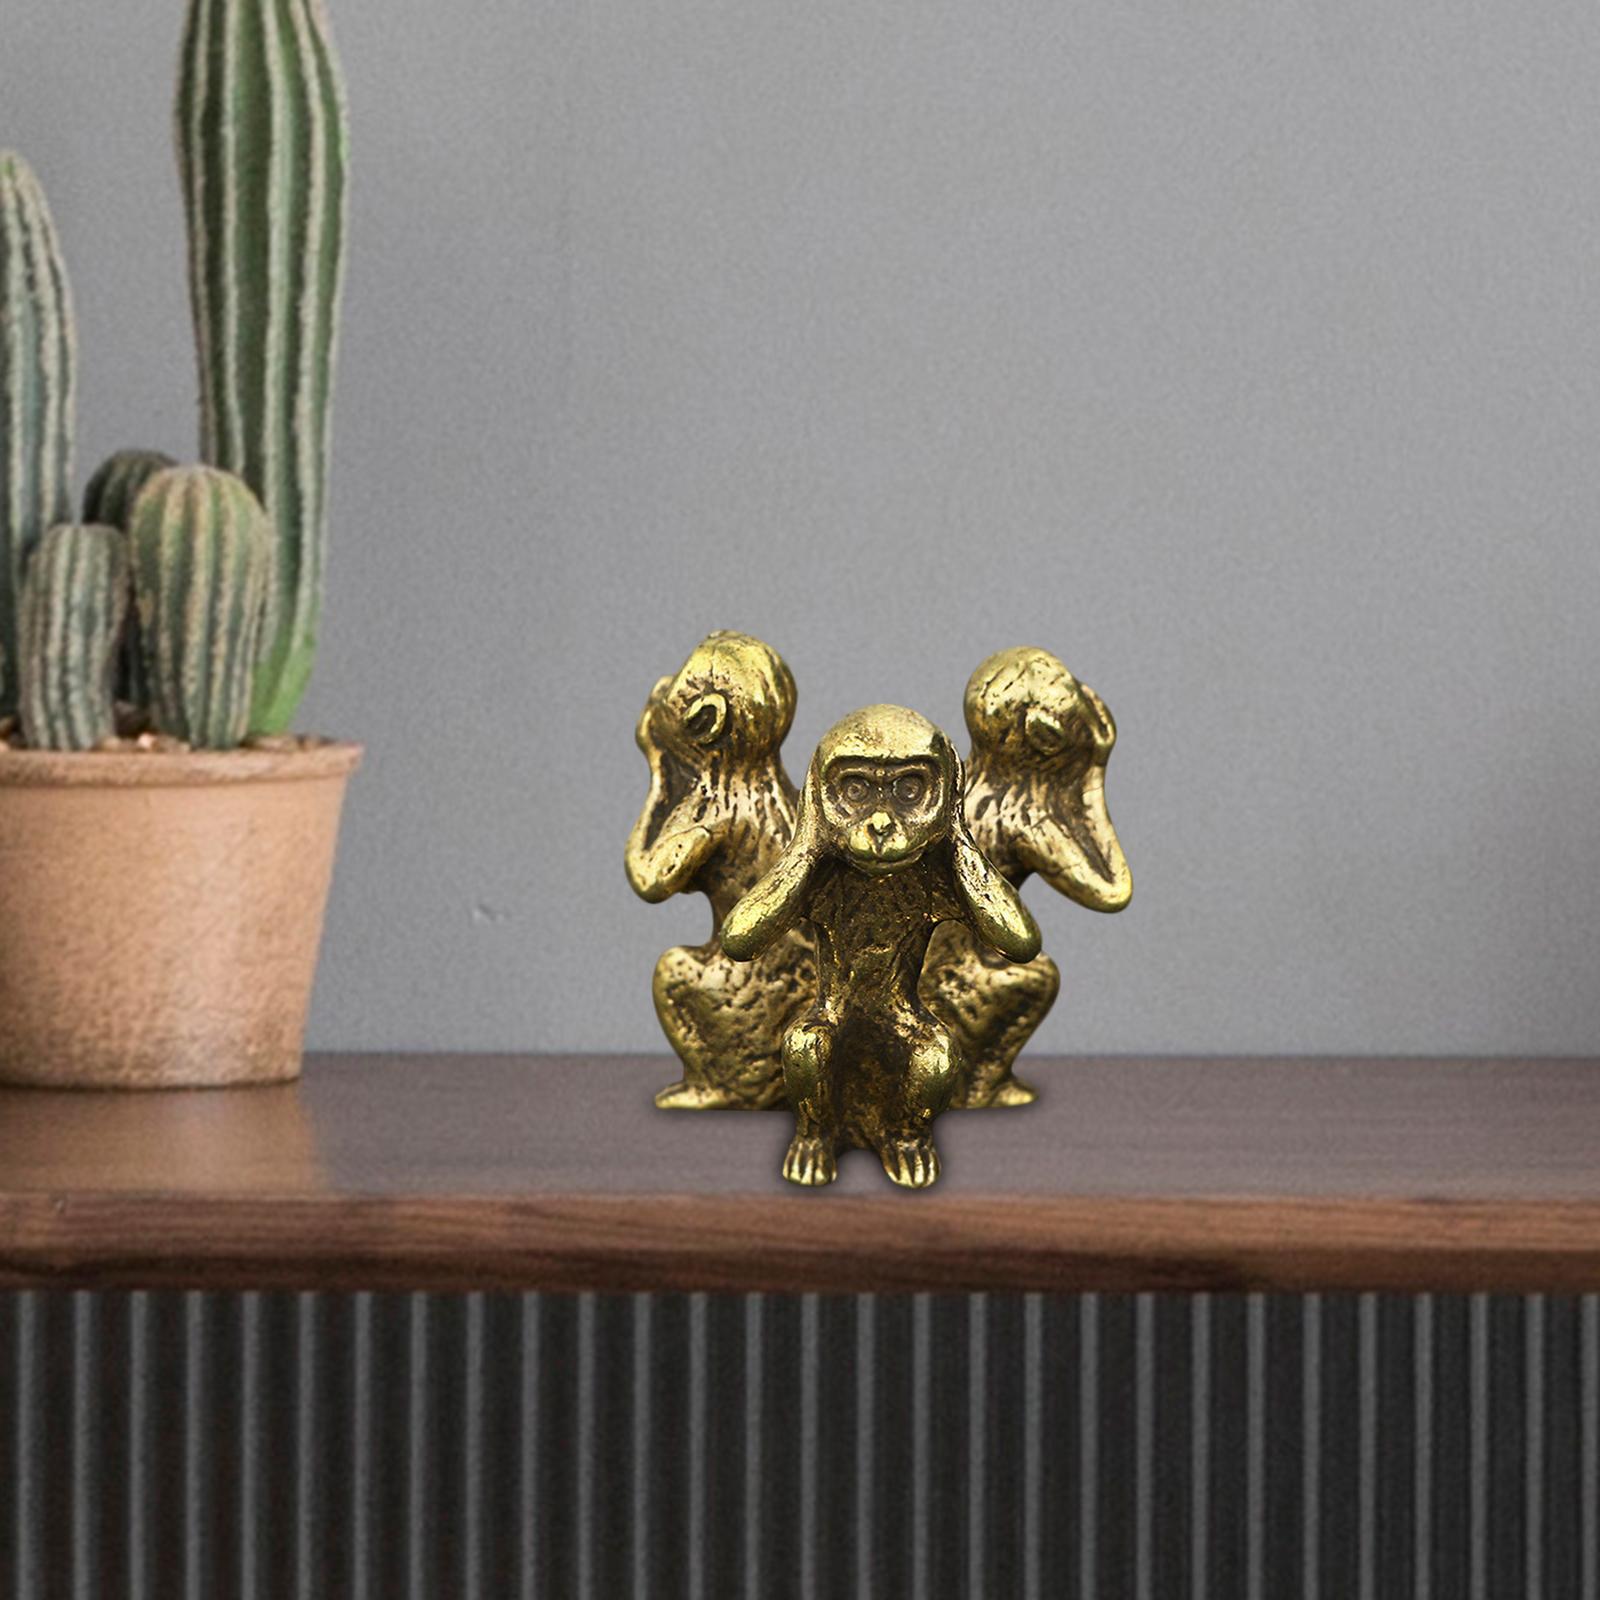 Monkey Figurine Animal Statues Ornament Sculptures for Office Home Decor